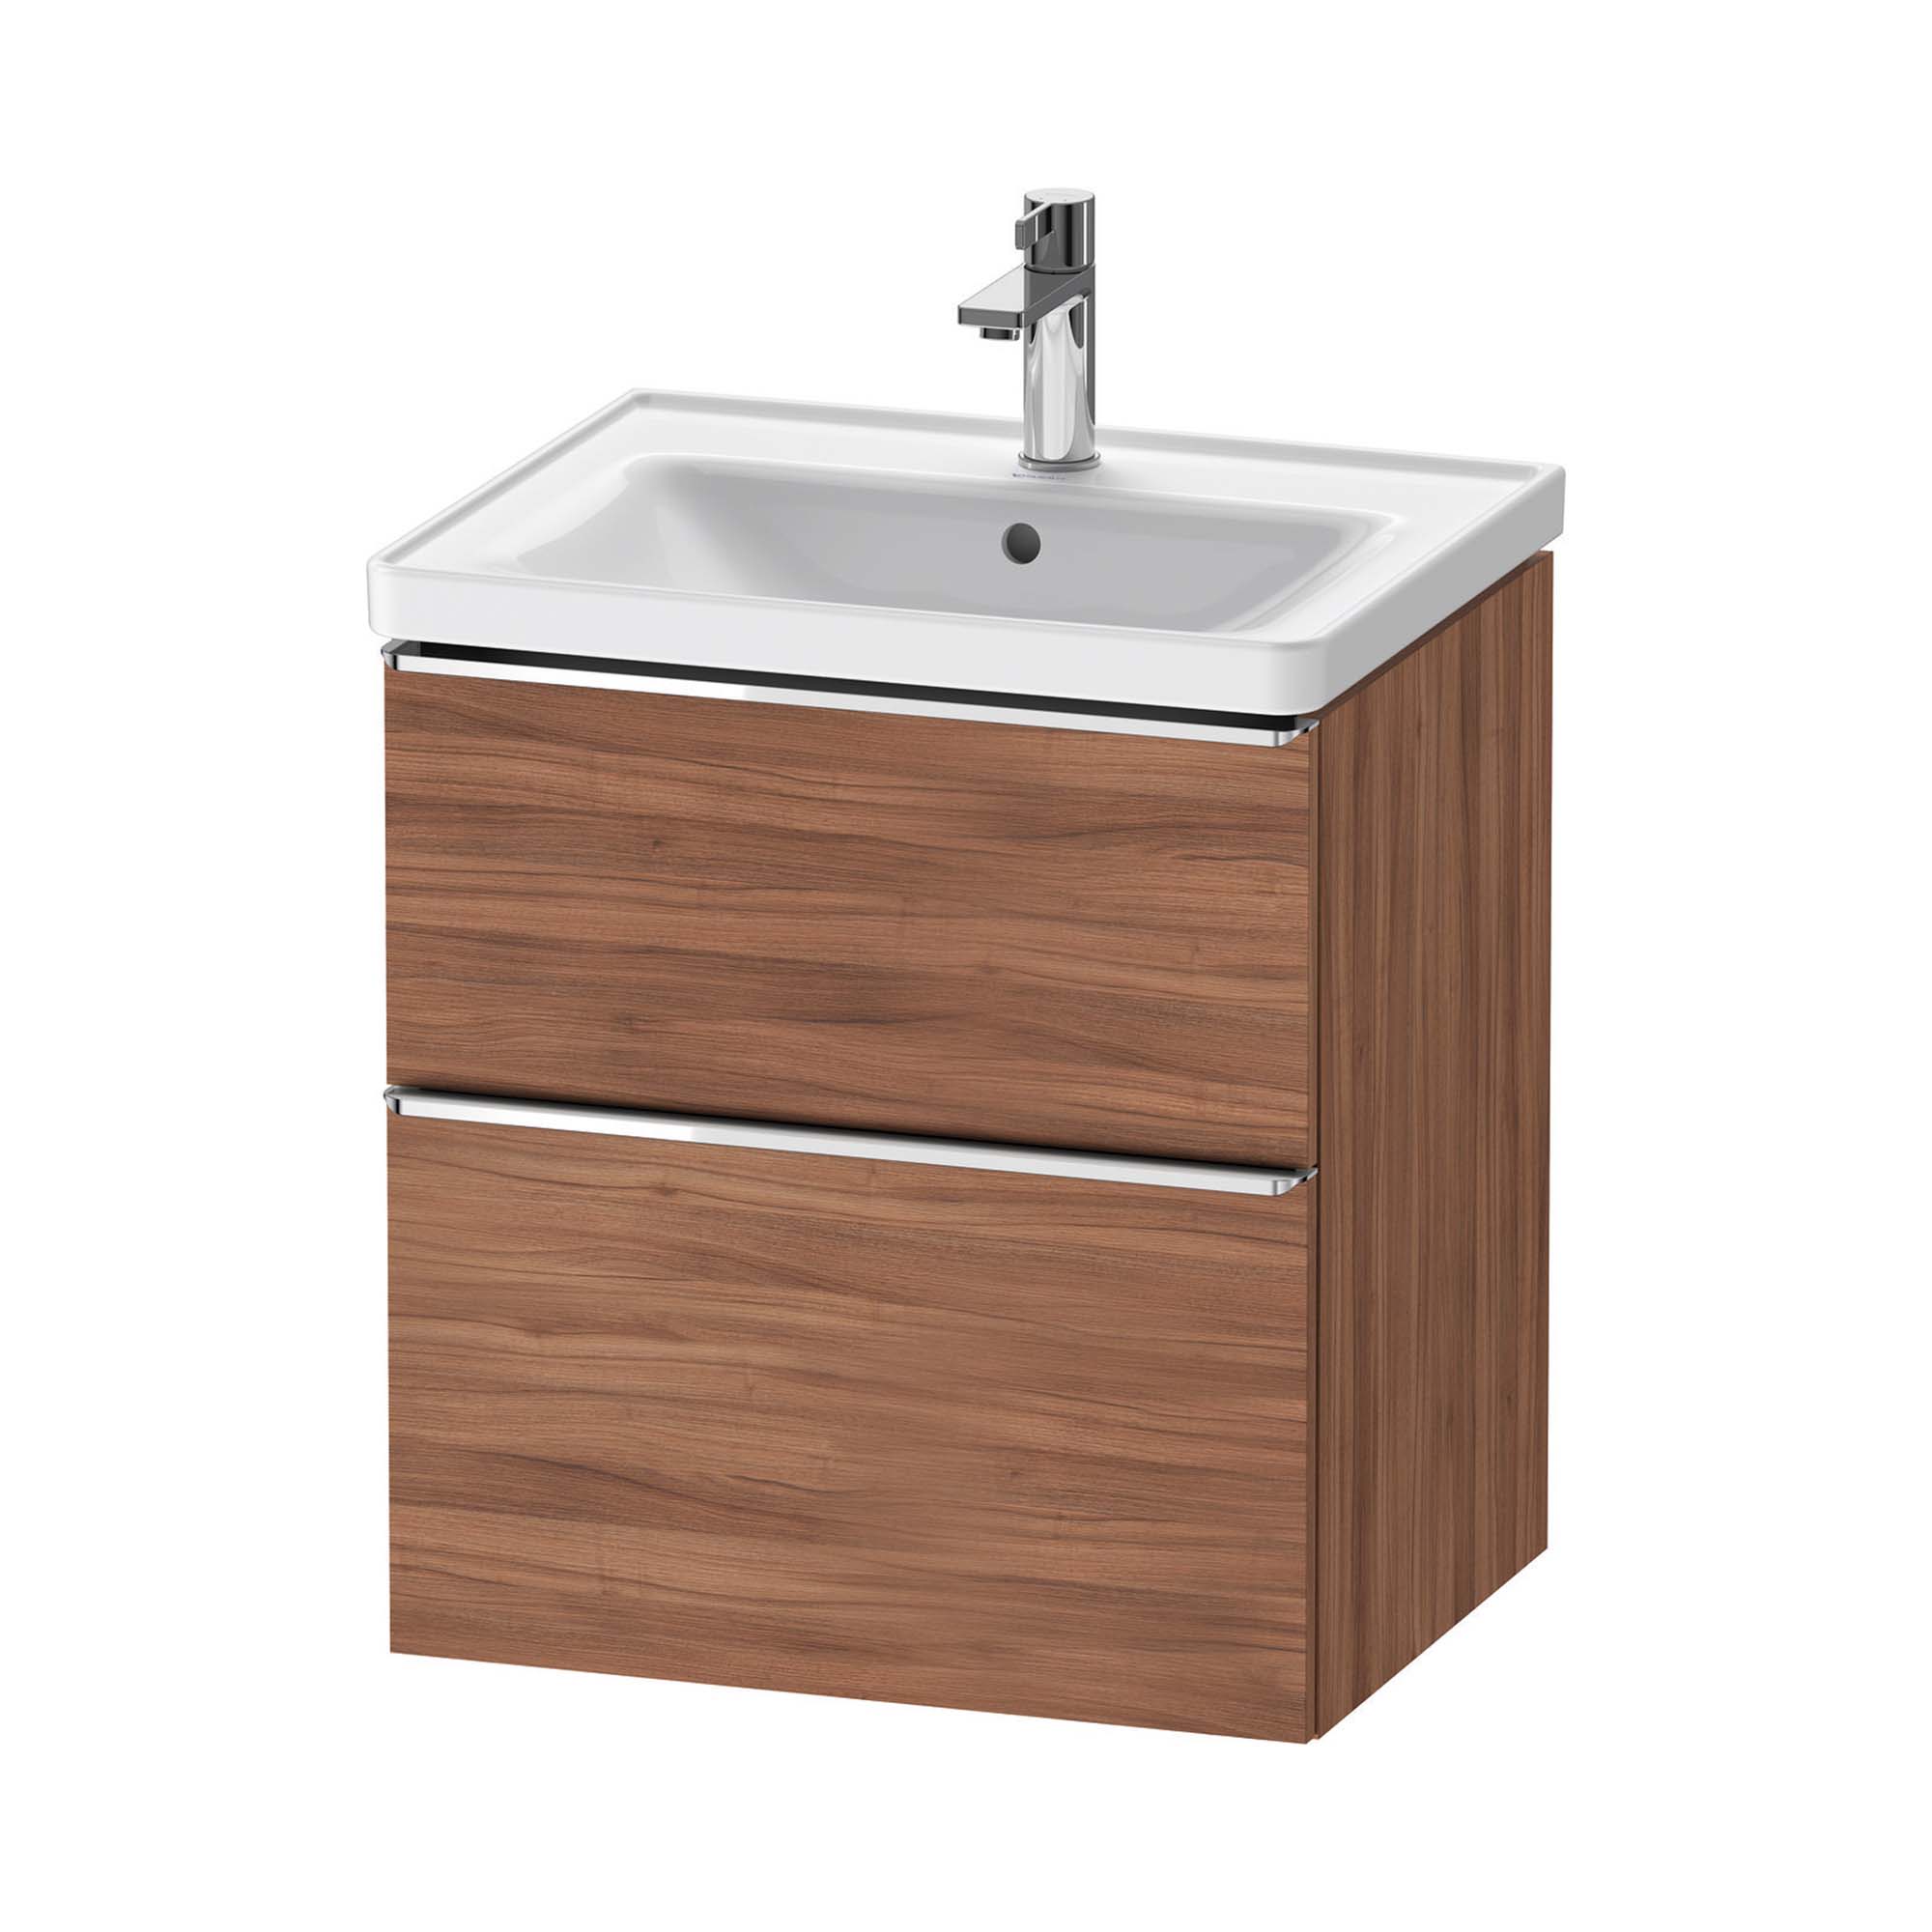 duravit d-neo 600 wall mounted vanity unit with d-neo basin walnut chrome handles